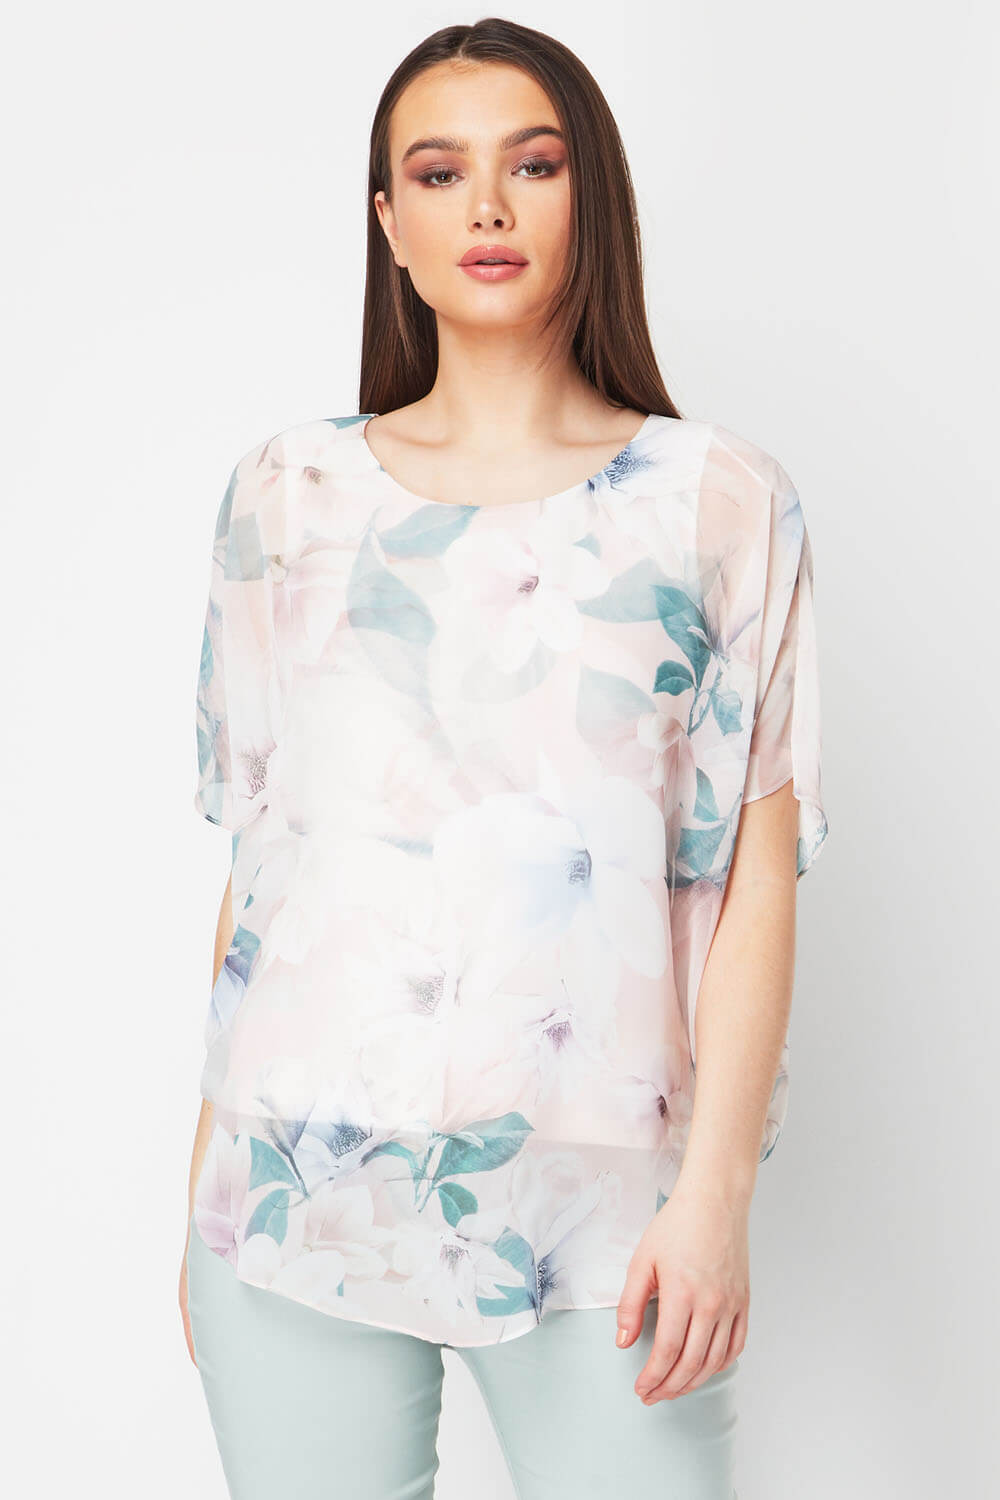 Floral Chiffon Overlay Top 